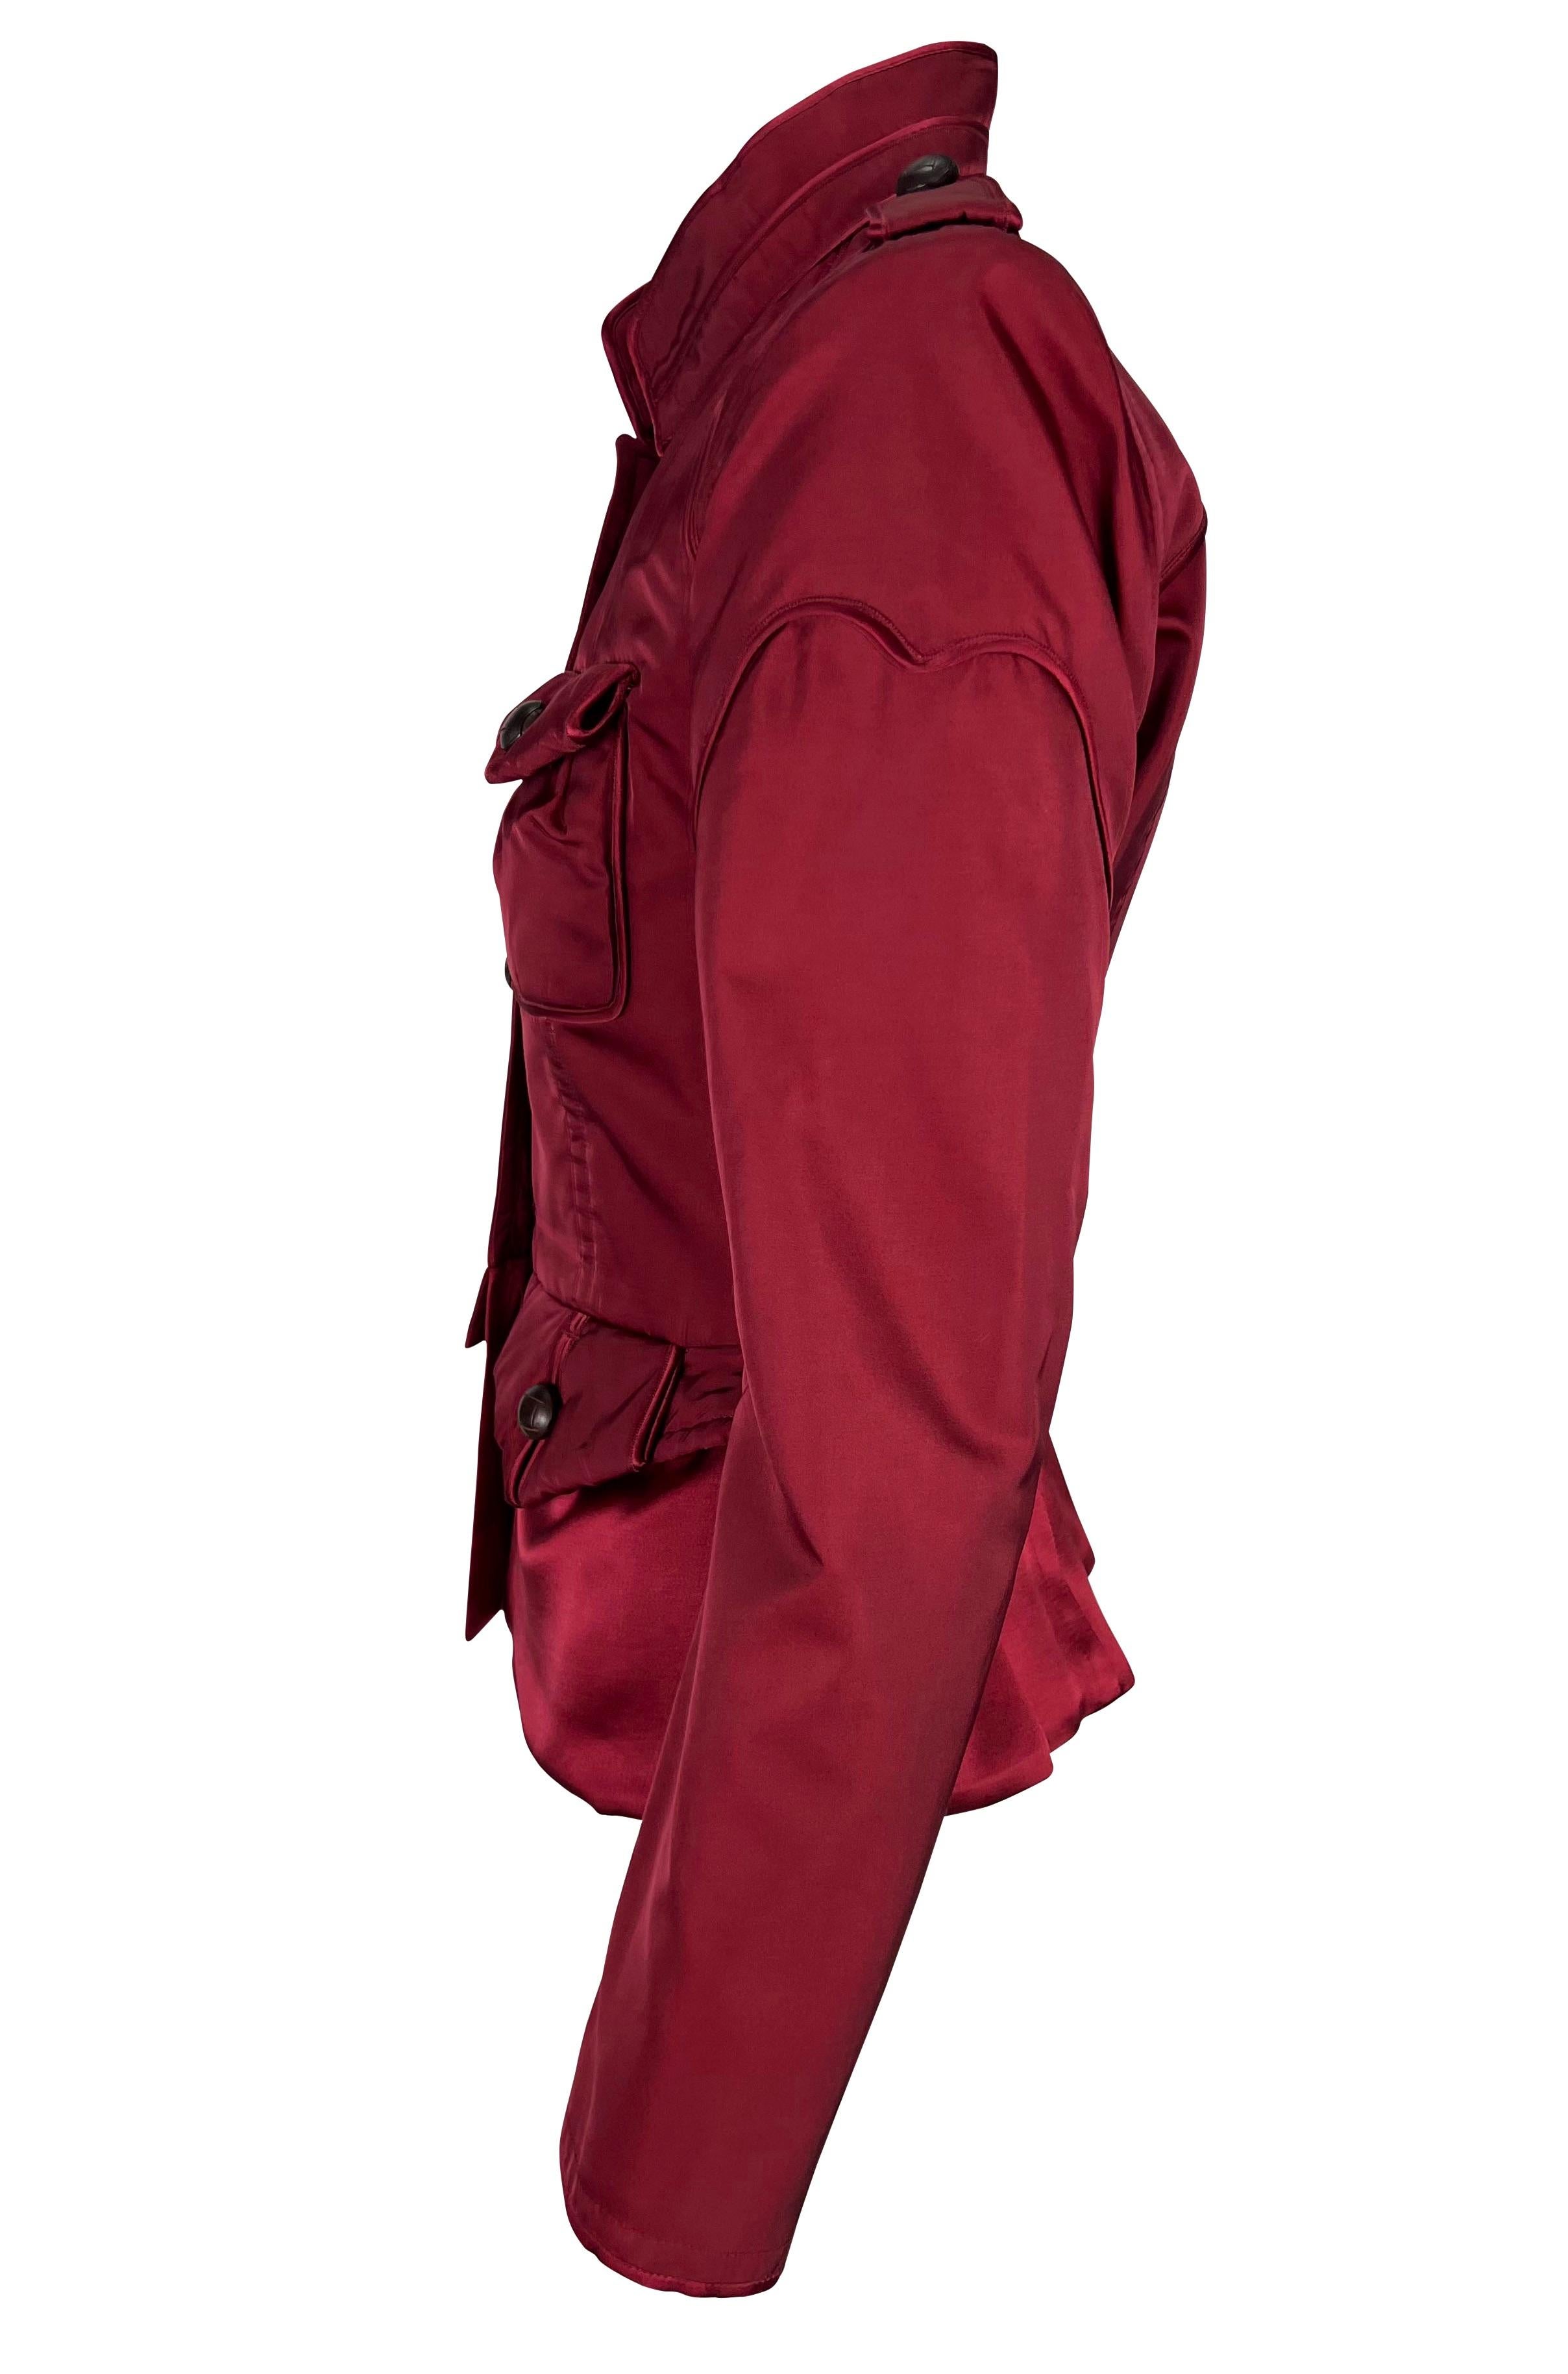 Women's F/W 2004 Yves Saint Laurent by Tom Ford Runway Red Silk Satin Cropped Jacket For Sale